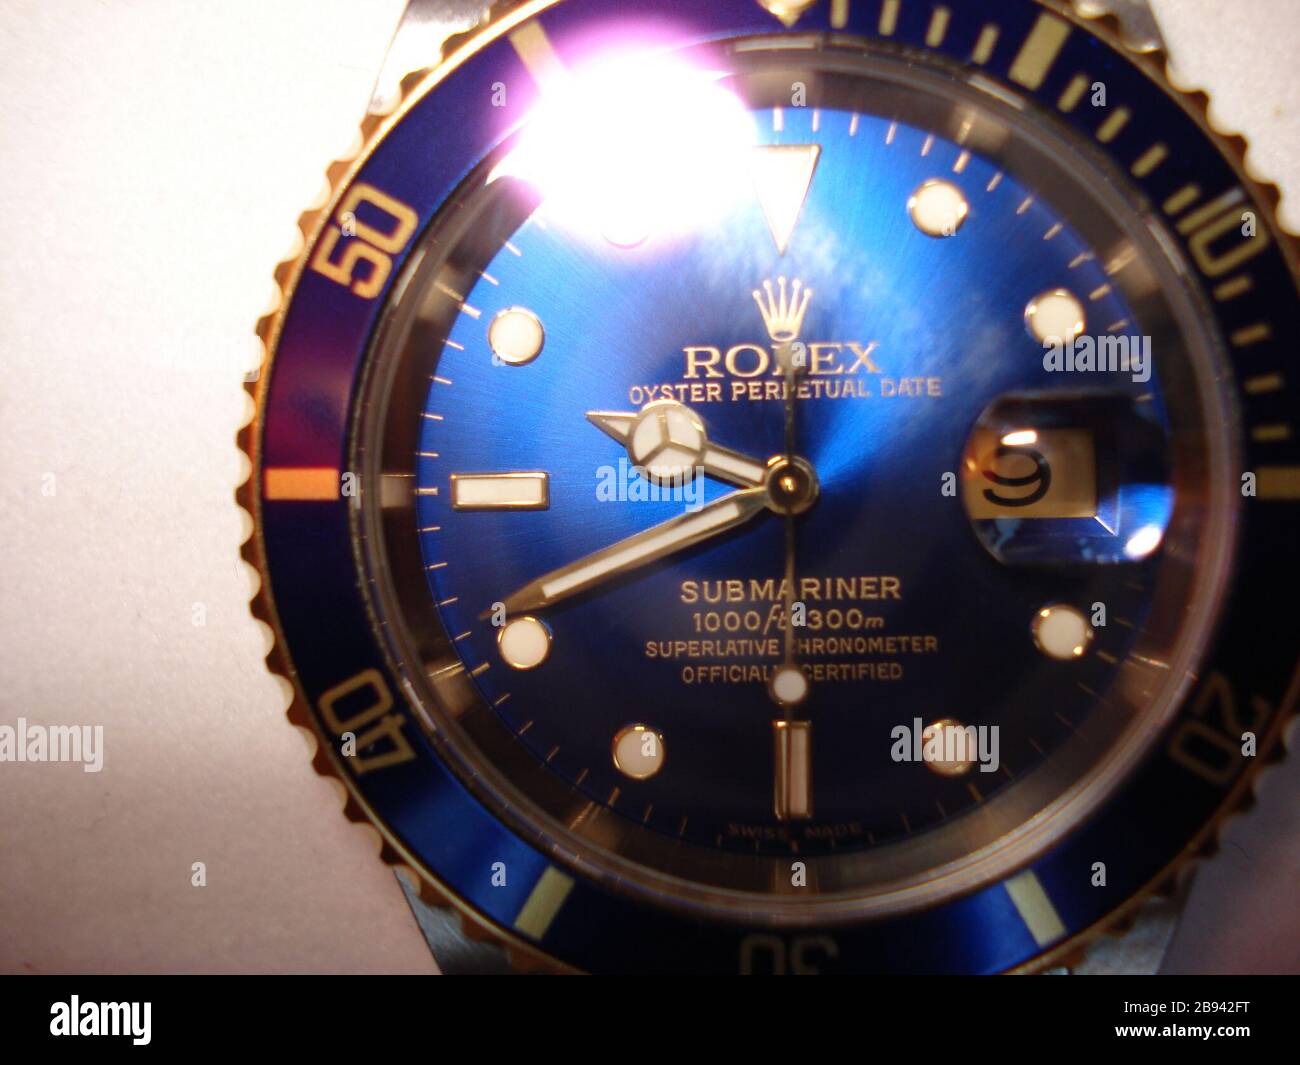 English: A Rolex Oyster Perpetual Date Submariner watch; 12 September 2007  (according to Exif data); Own work of English Wikipedia user  Eternalsleeper; User:Eternalsleeper Stock Photo - Alamy